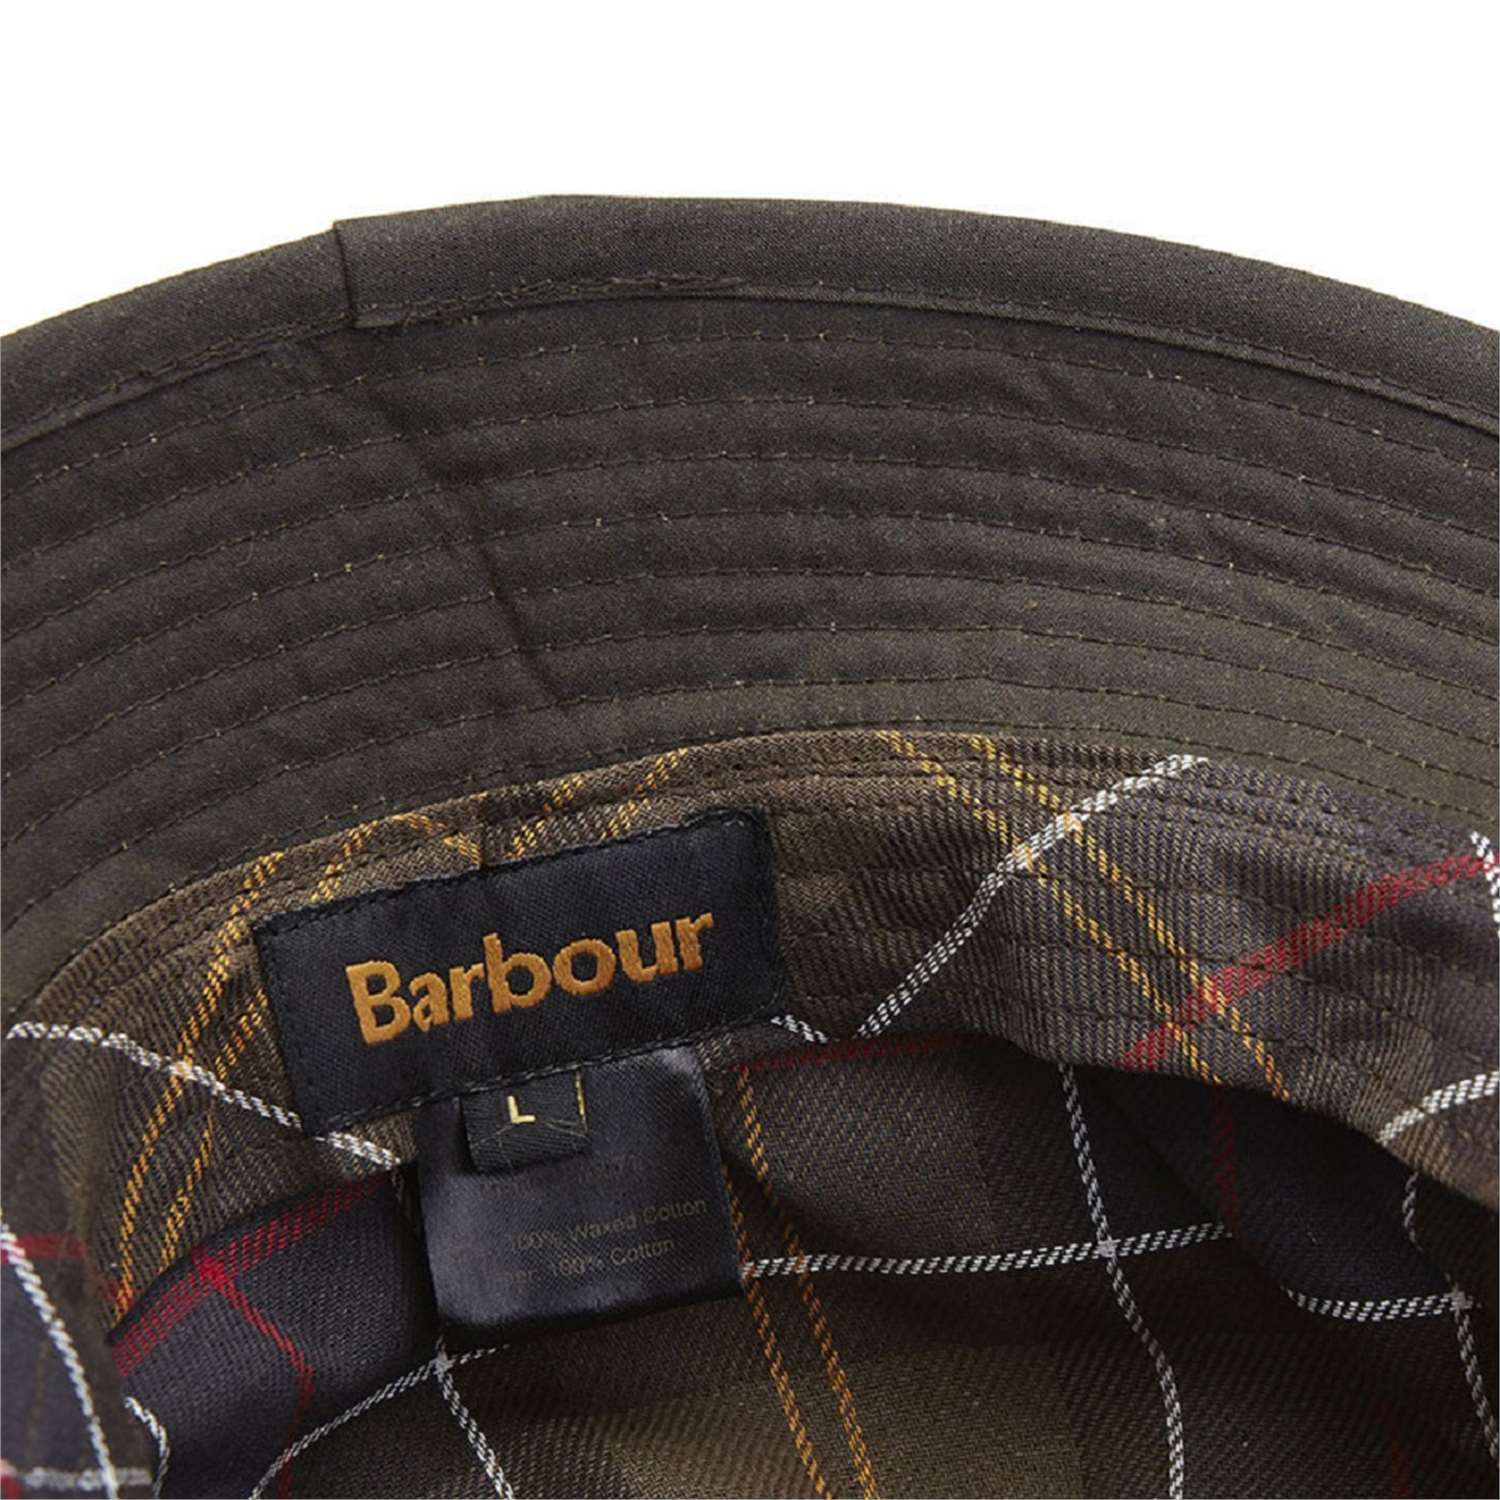 Barbour BAACC0247 OL71 Olive Accessories Man 